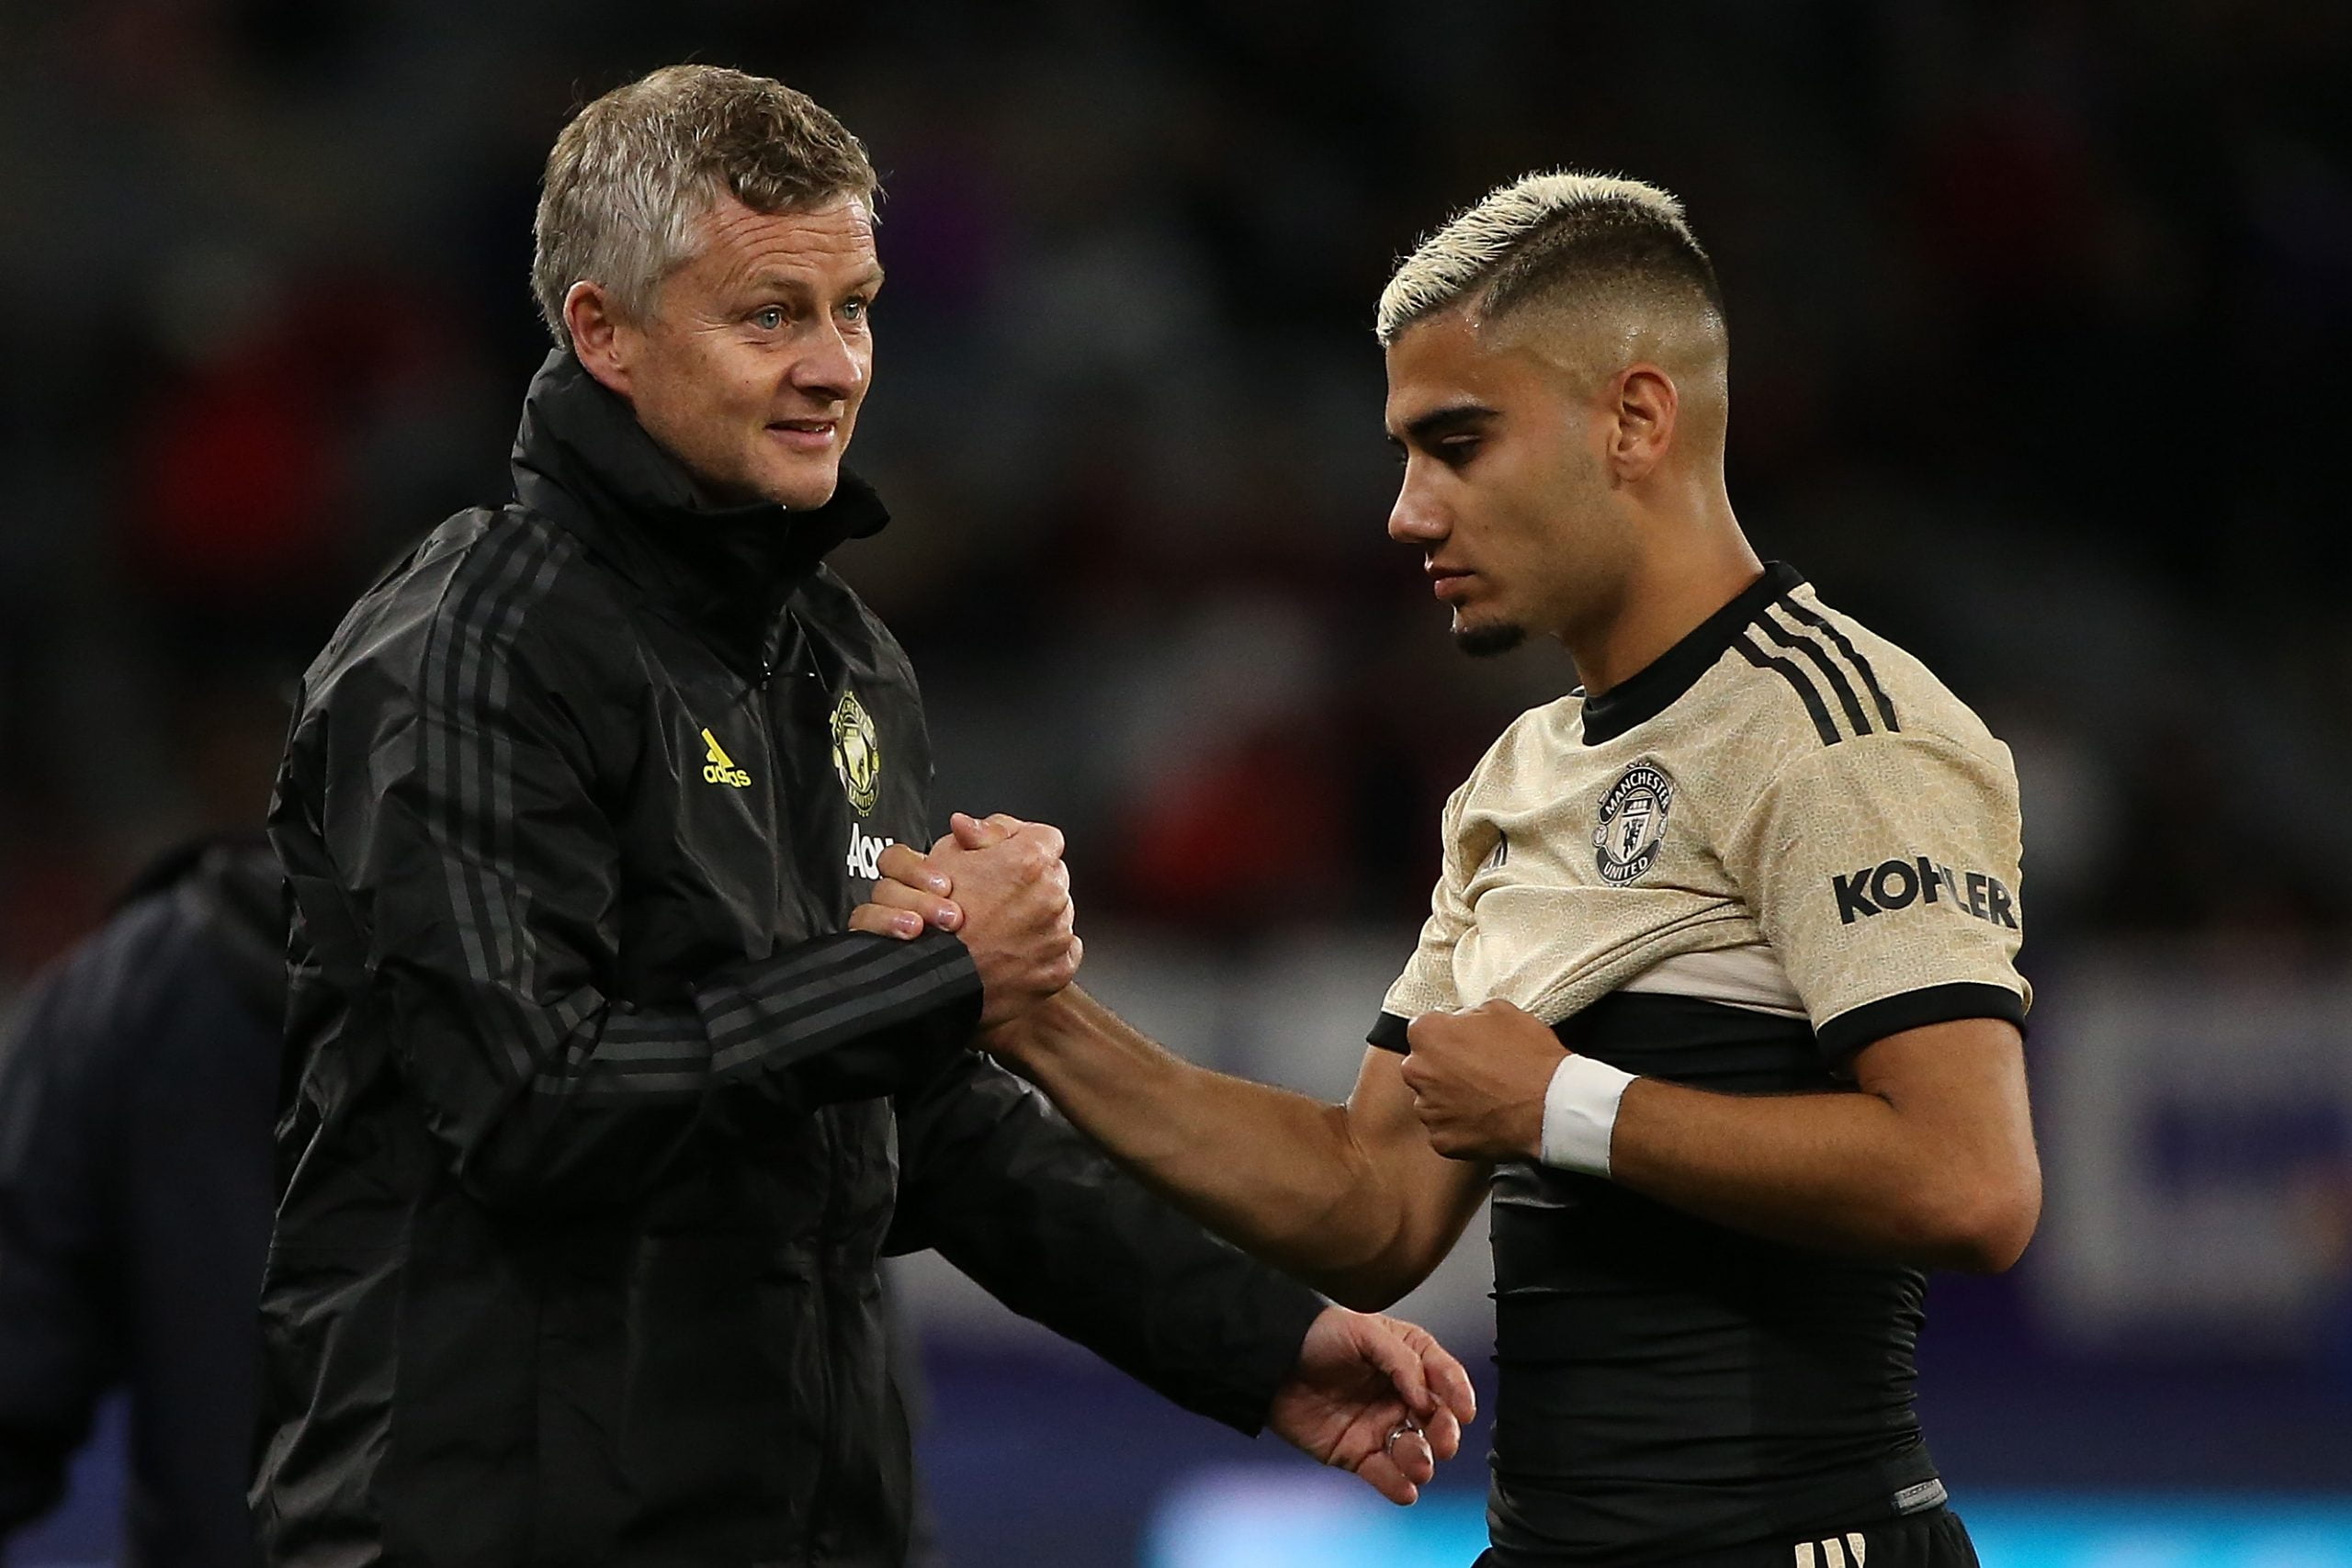 Newcastle United locked in a three-way battle for Pereira who is seen in the picture